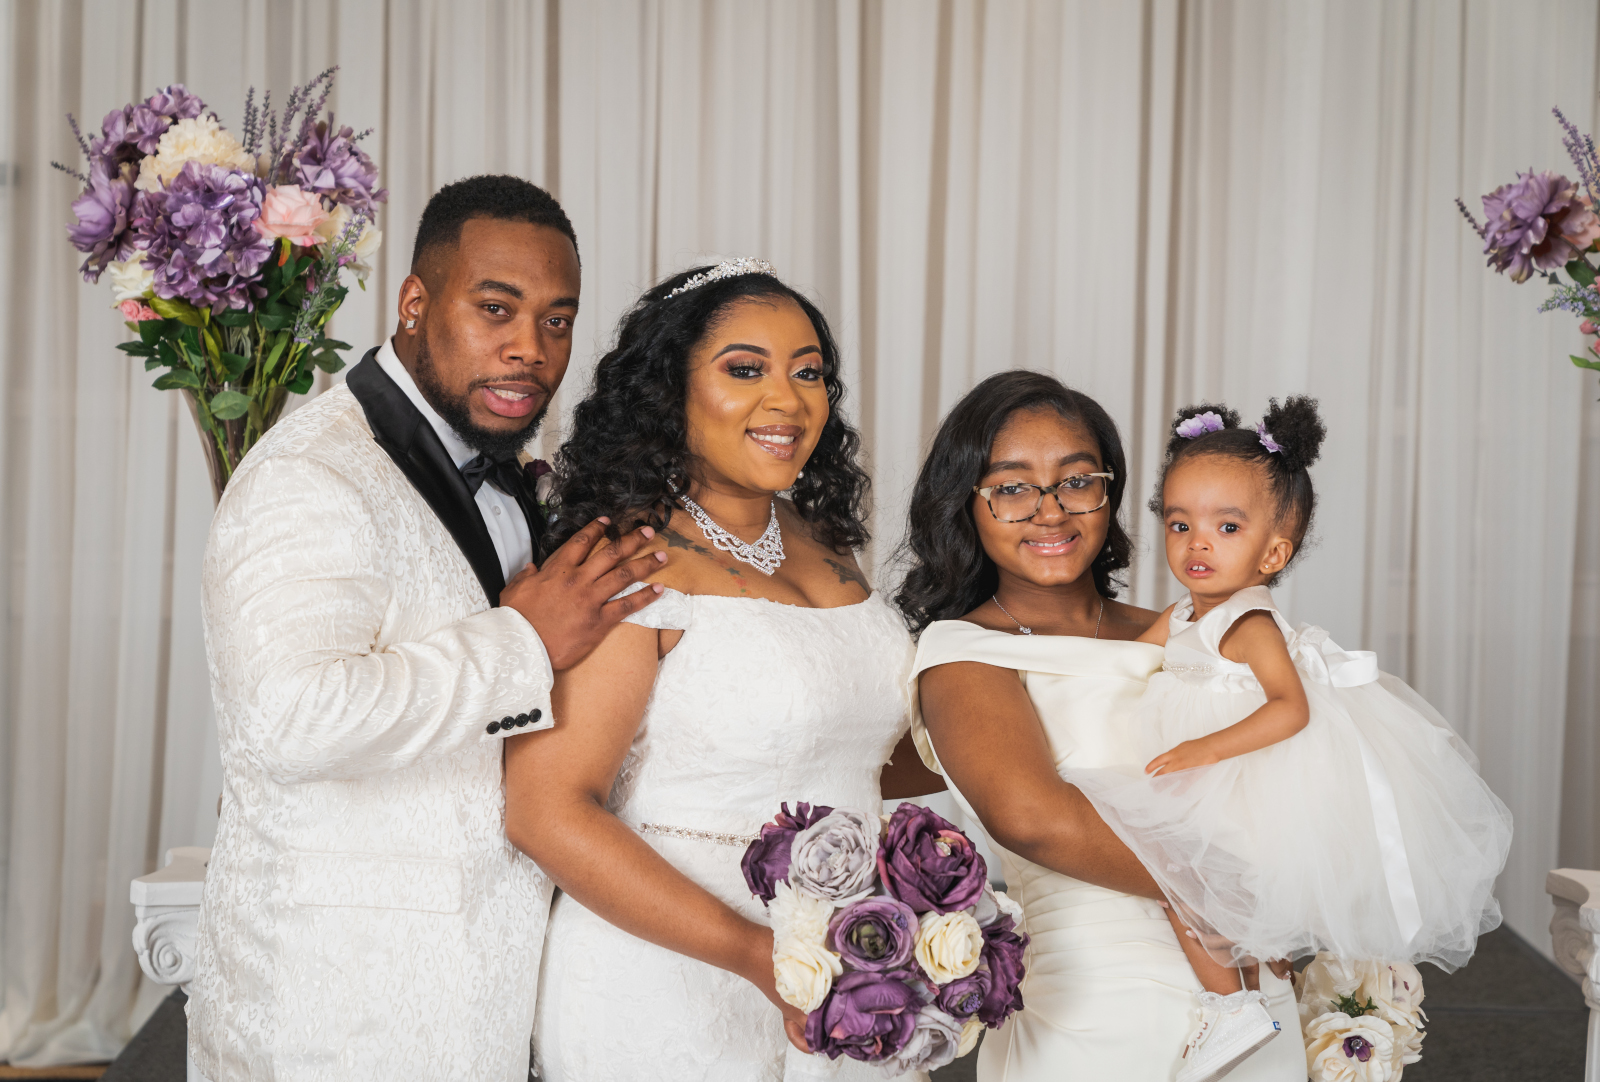 Bride and groom with flower girl, bridal party portrait, family portrait, African American bride, African American wedding, romantic wedding ceremony at Hilton Akron/Fairlawn